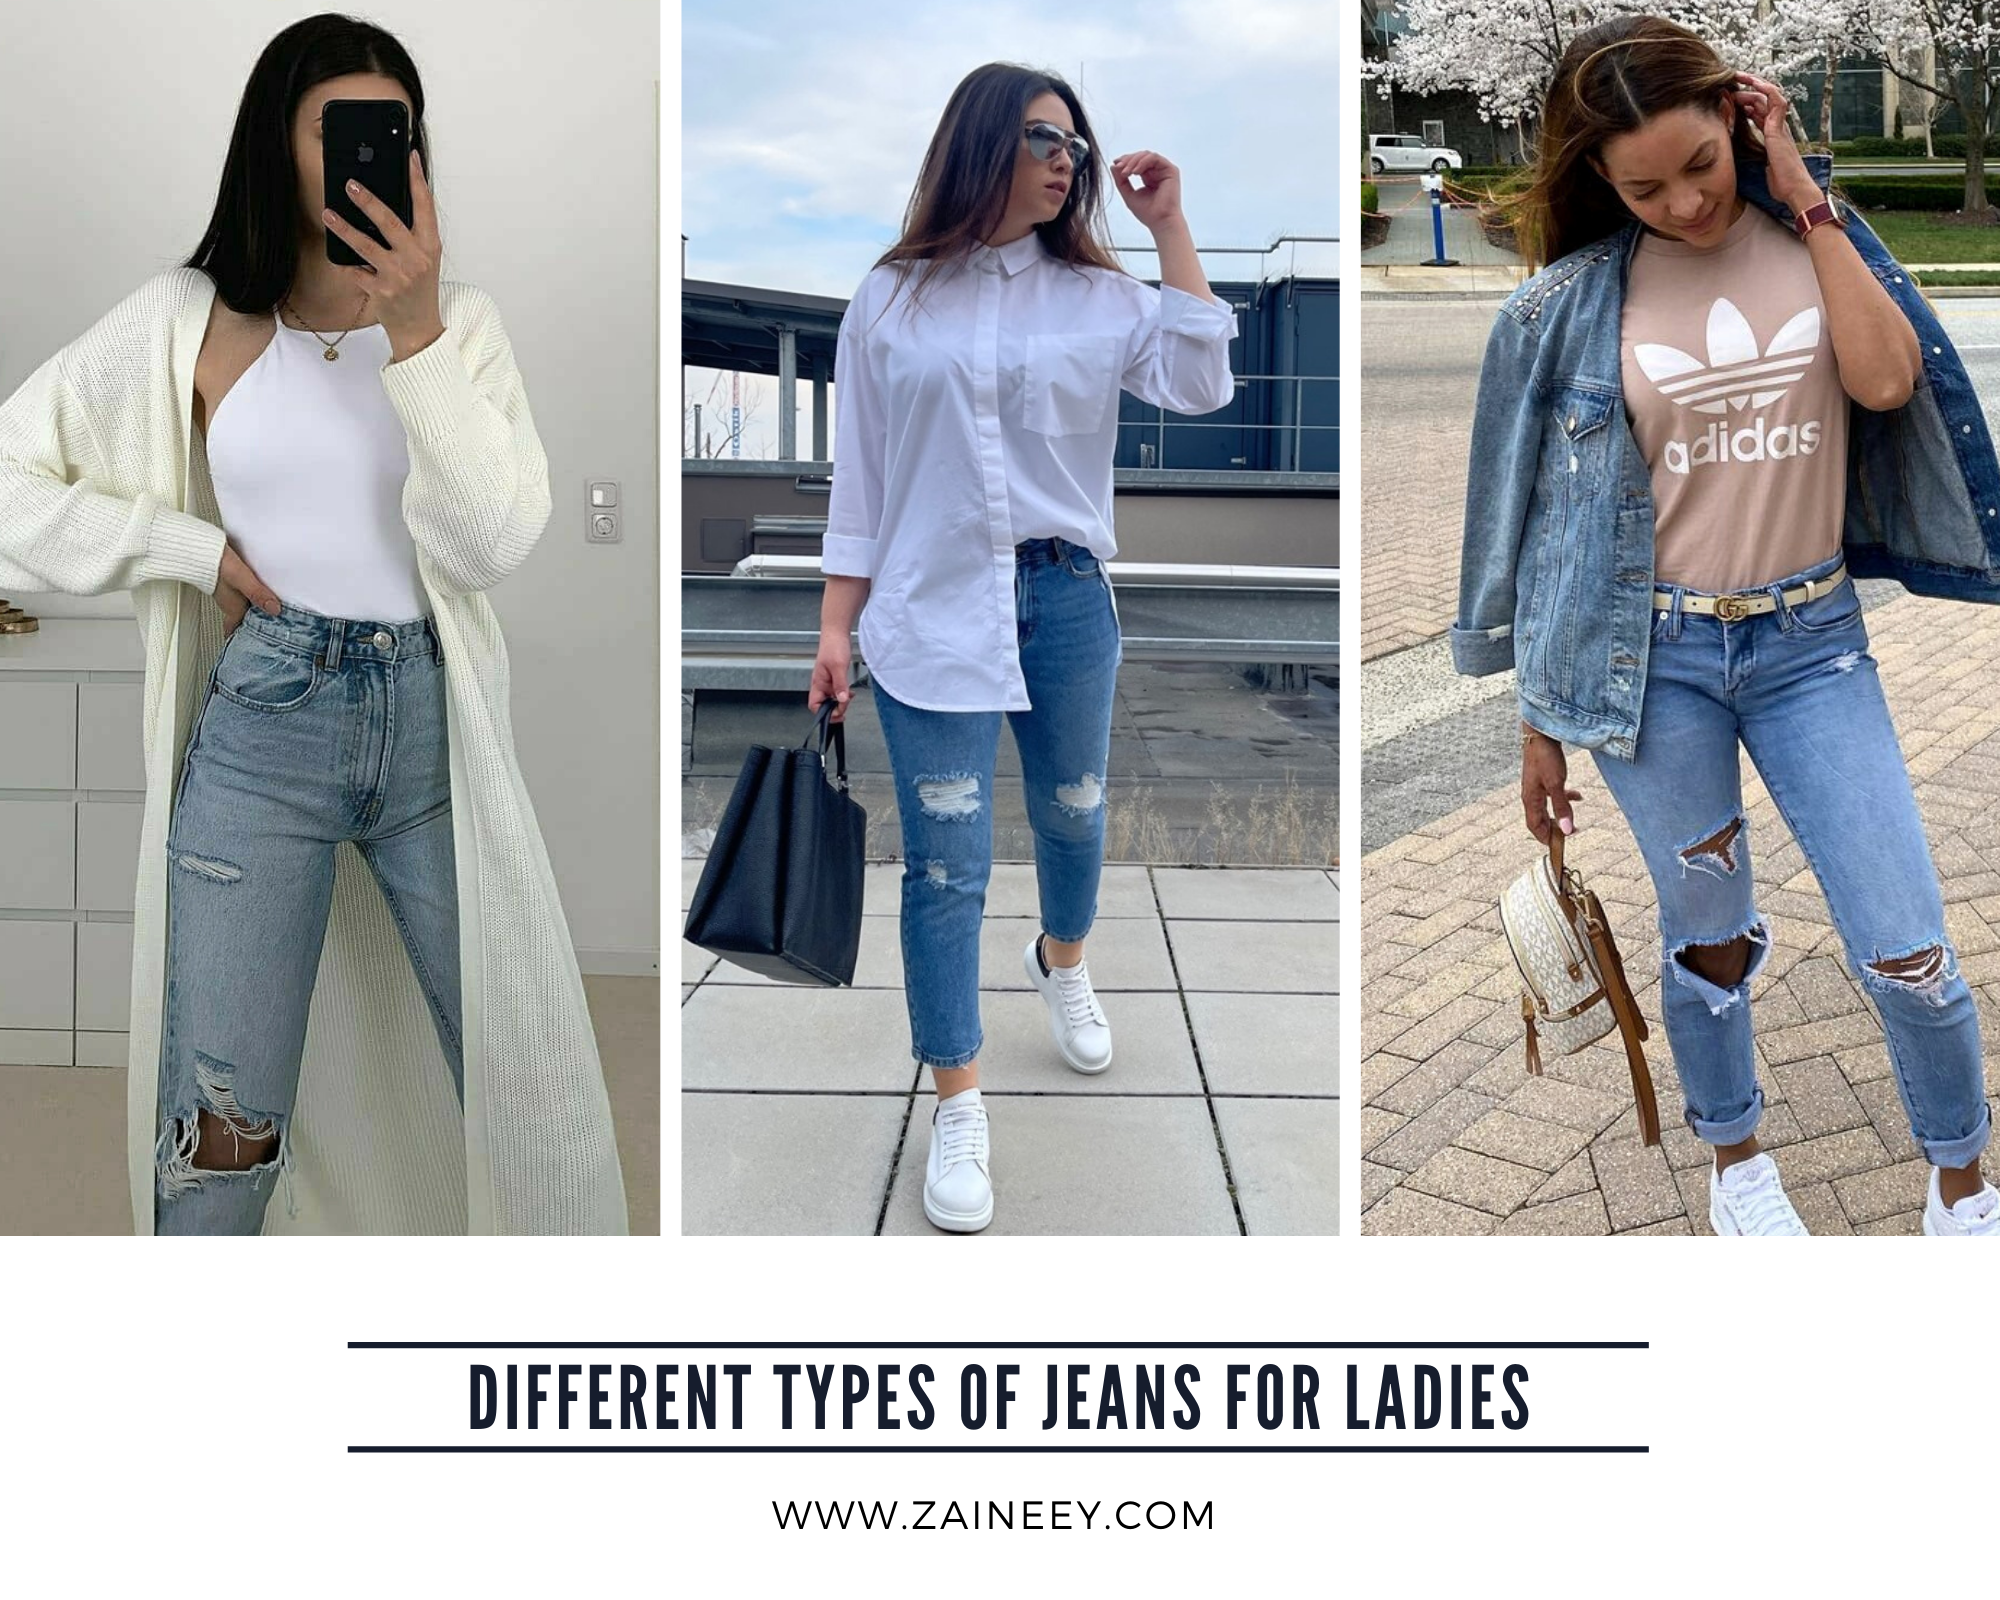 Different types of jeans for ladies and how to style them in the most gorgeous and stunning ways